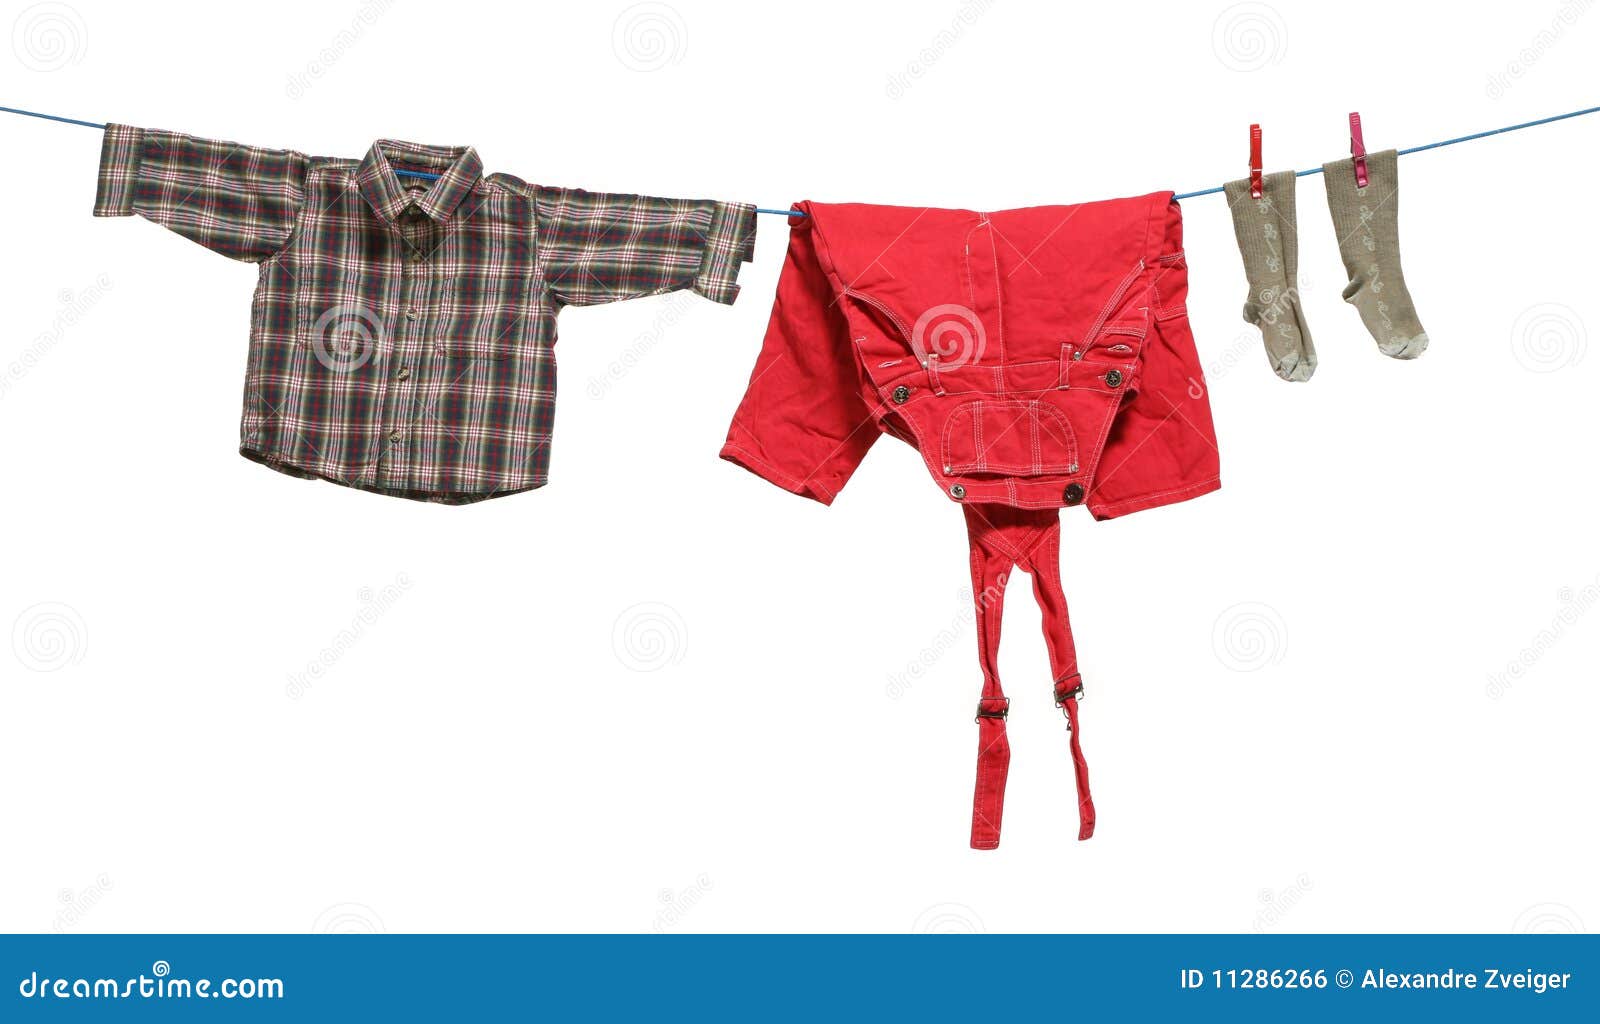 Cloths drawn stock photo. Image of rope, garment, laundry - 11286266